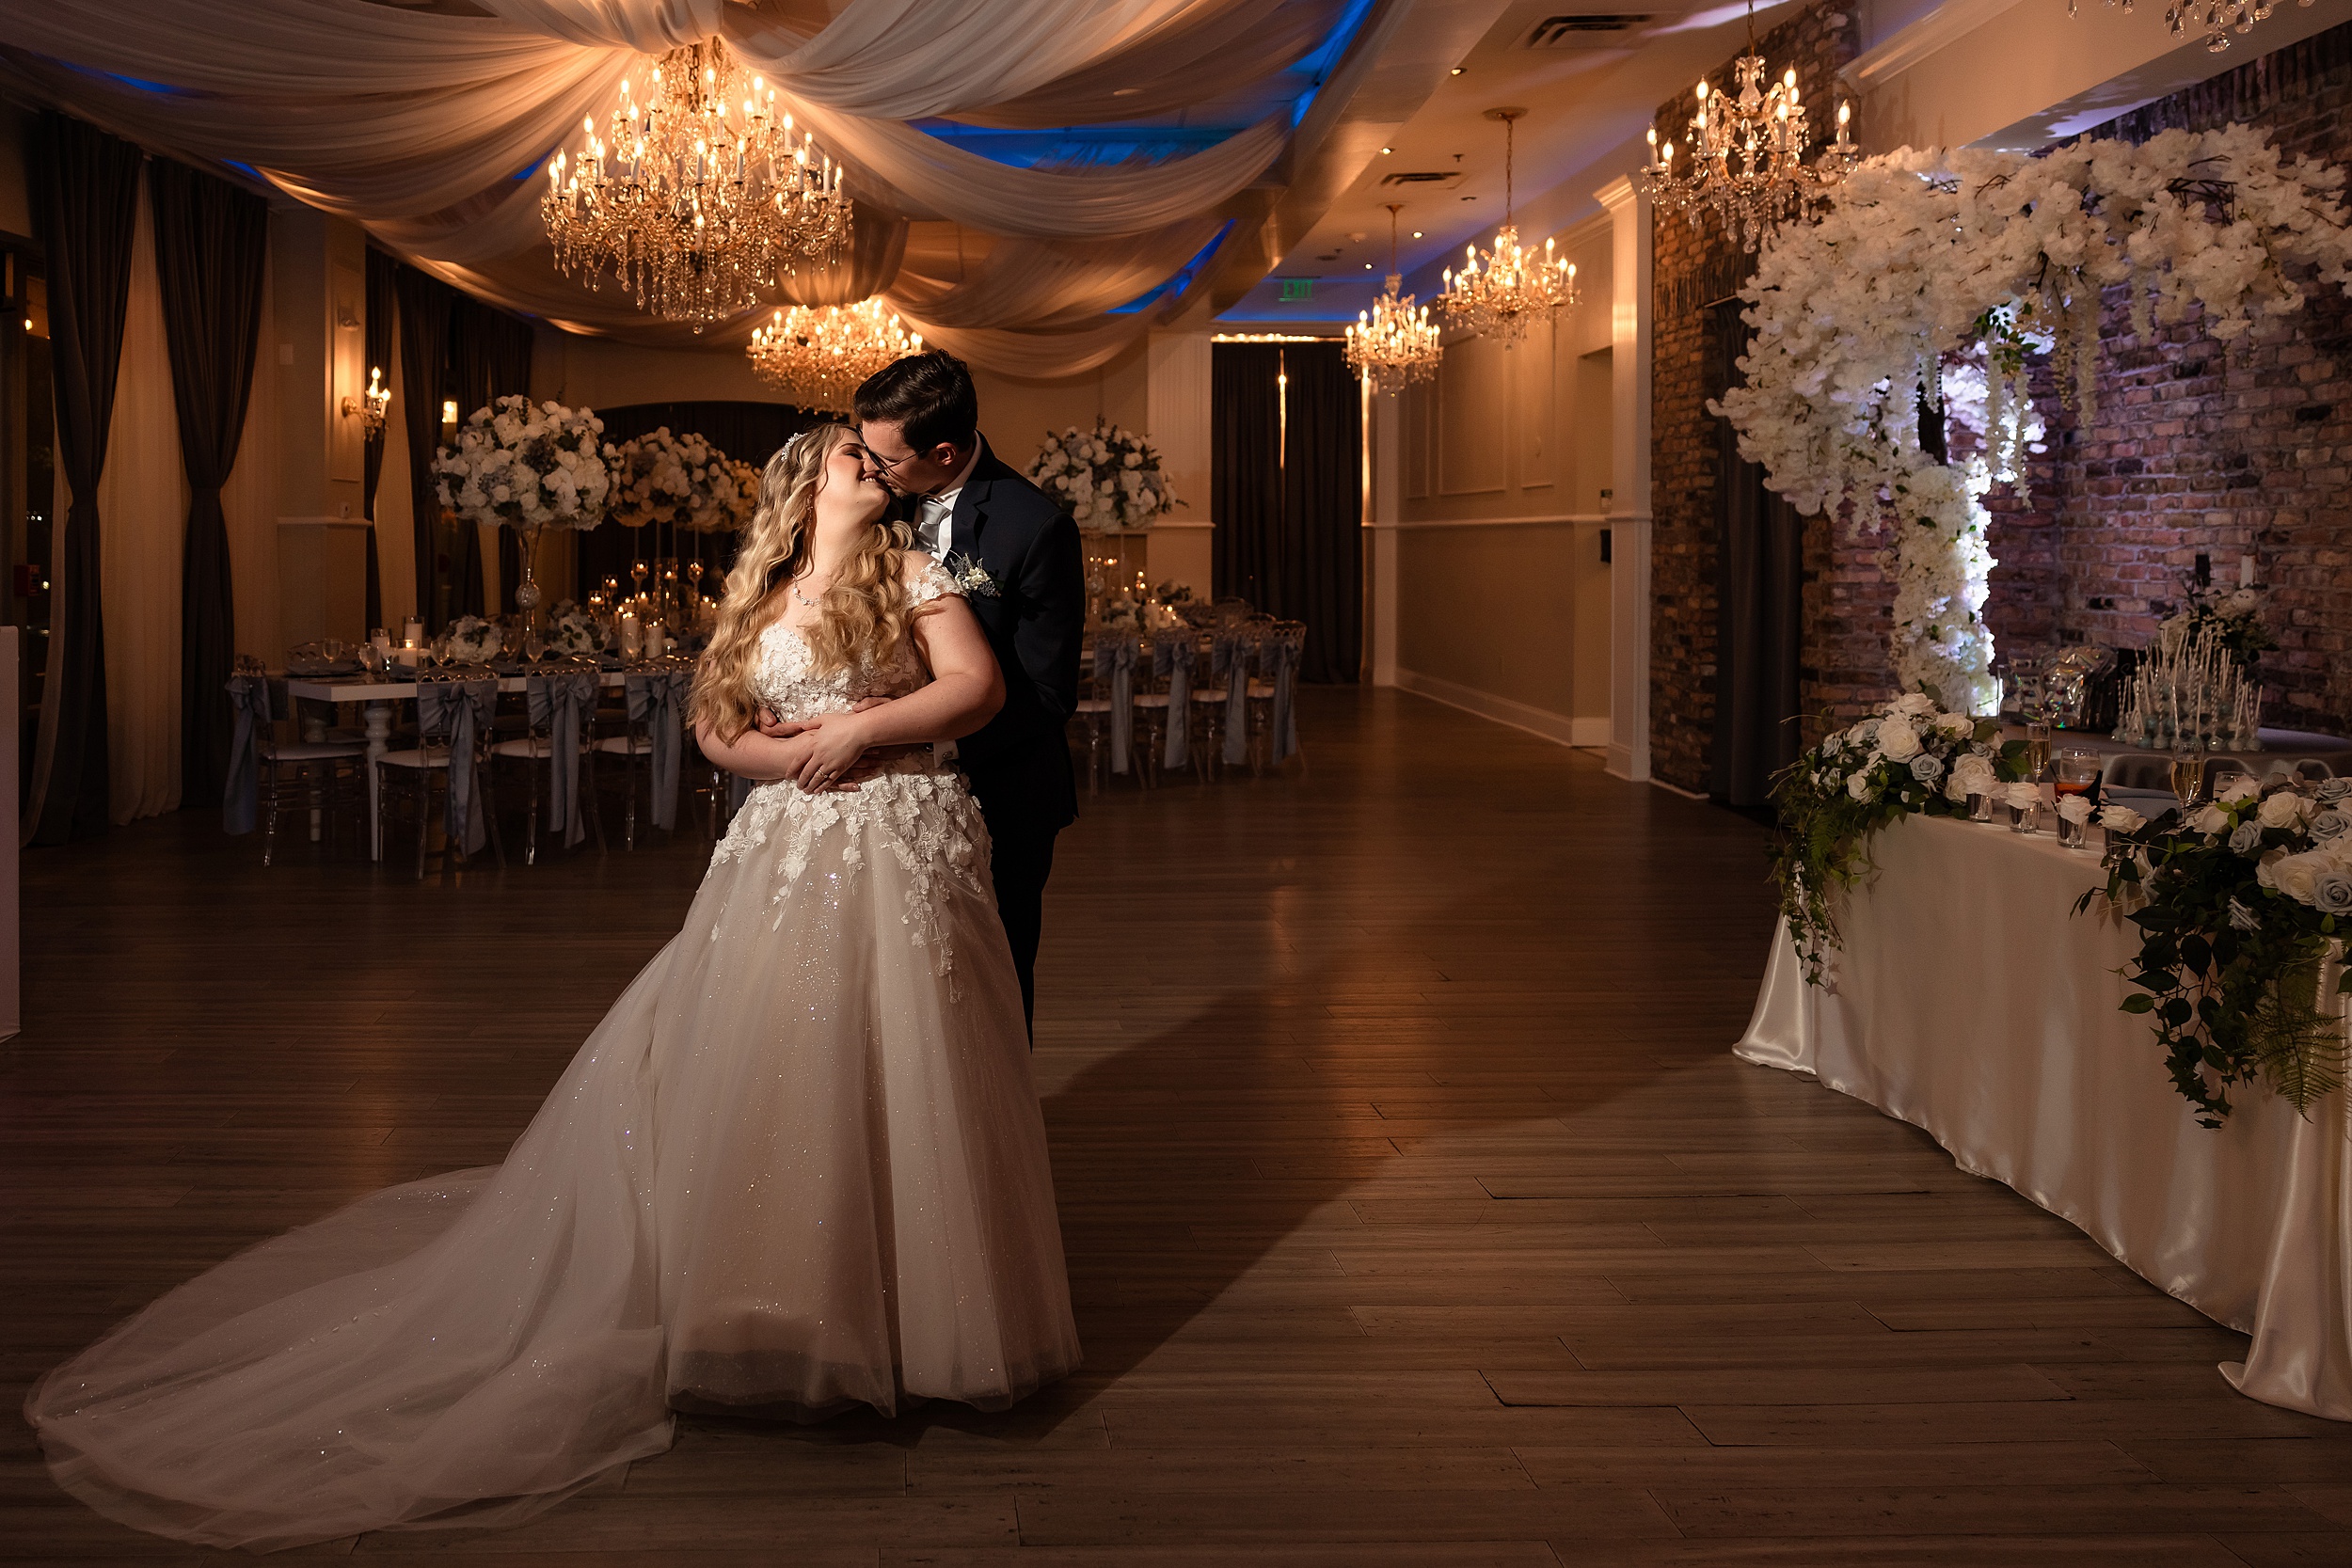 Newlyweds share a kiss inside their empty reception ballroom covered in flowers and chandeliers